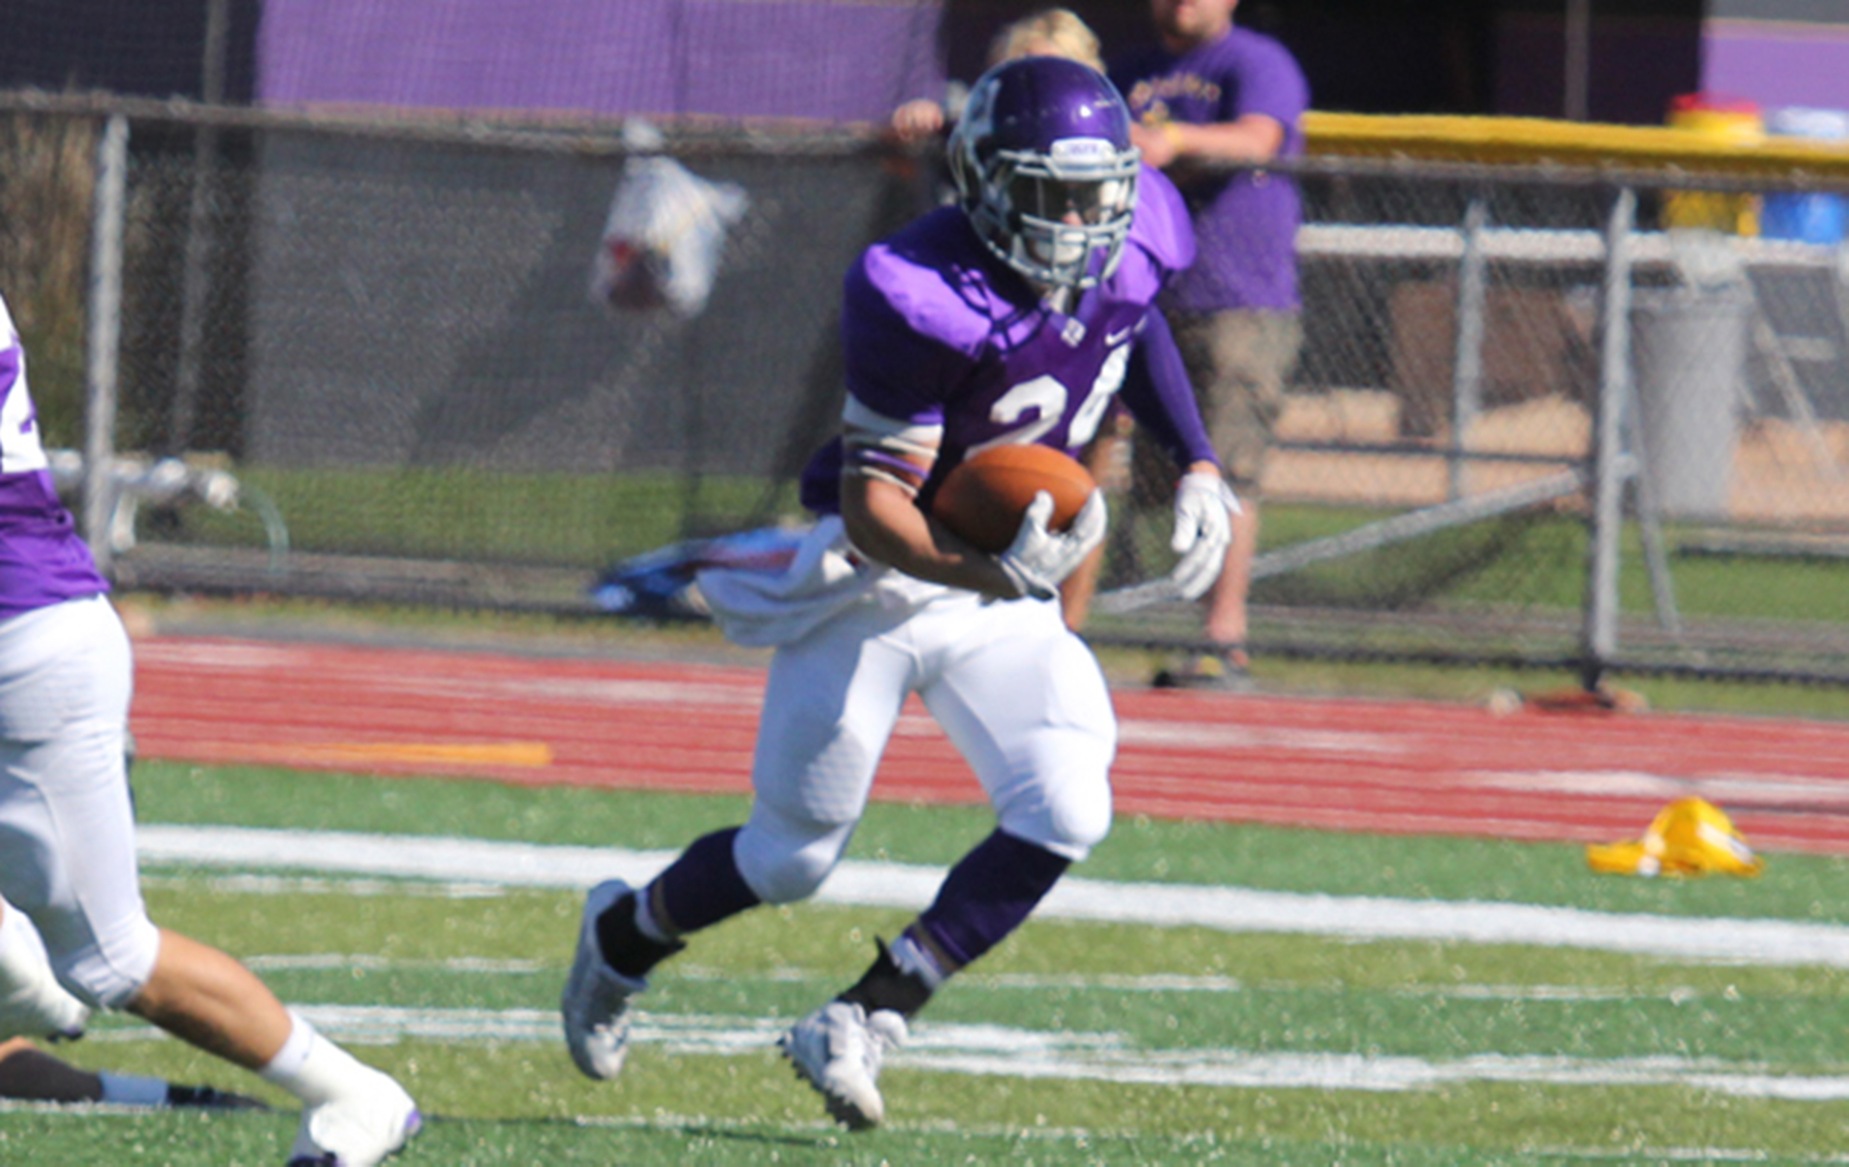 Sierra Leads List of 11 Yellow Jackets Named to All-HCAC Teams